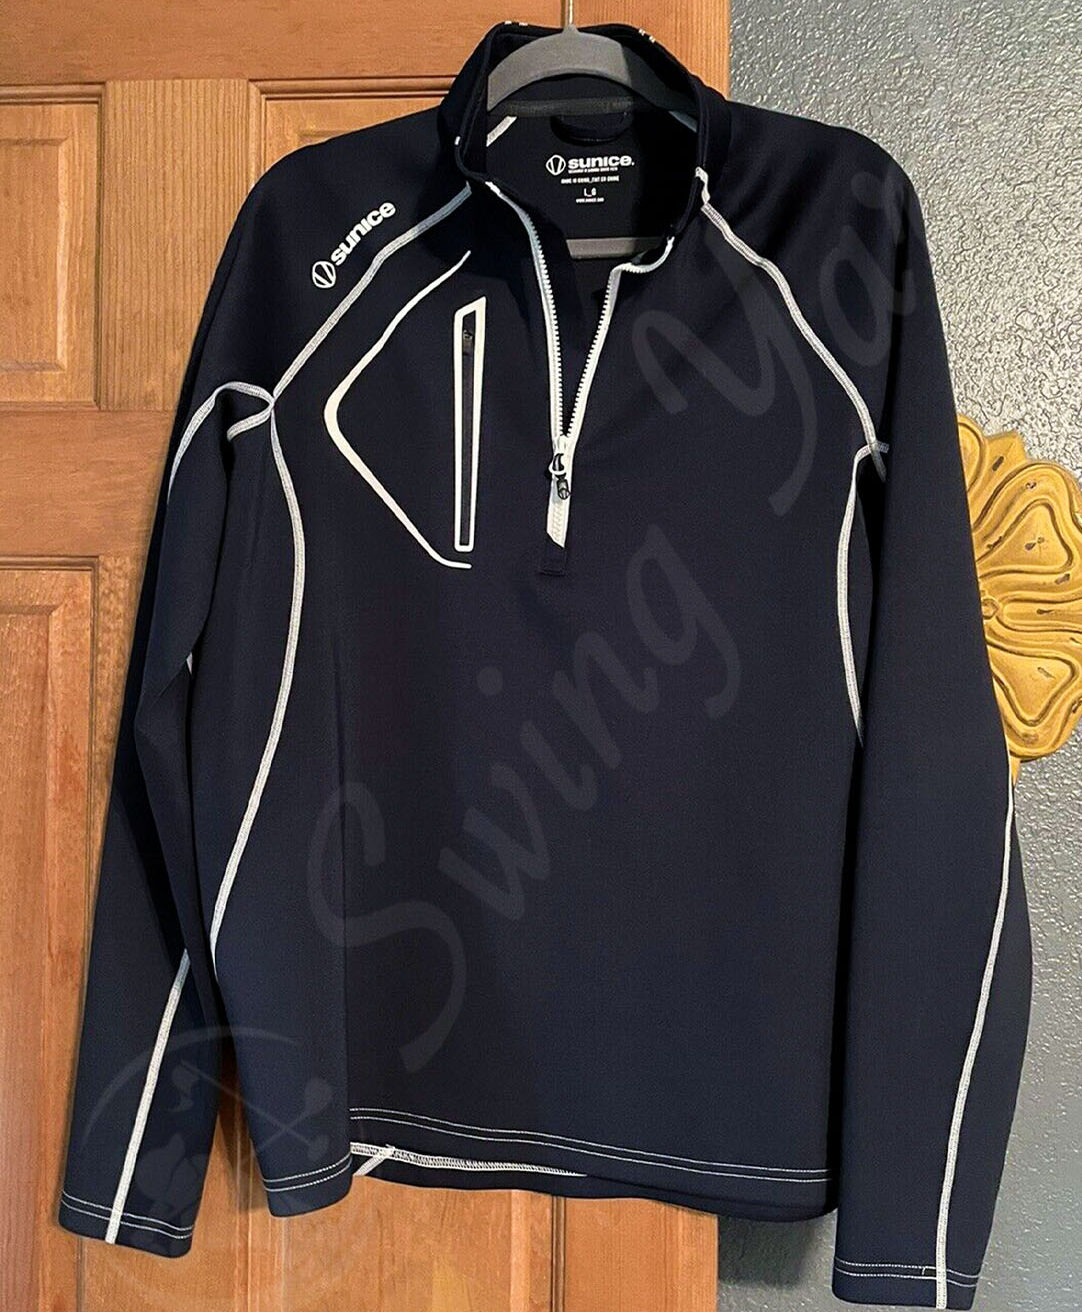 A black Sunice allendale men’s thermal golf jacket pullover hang on the door